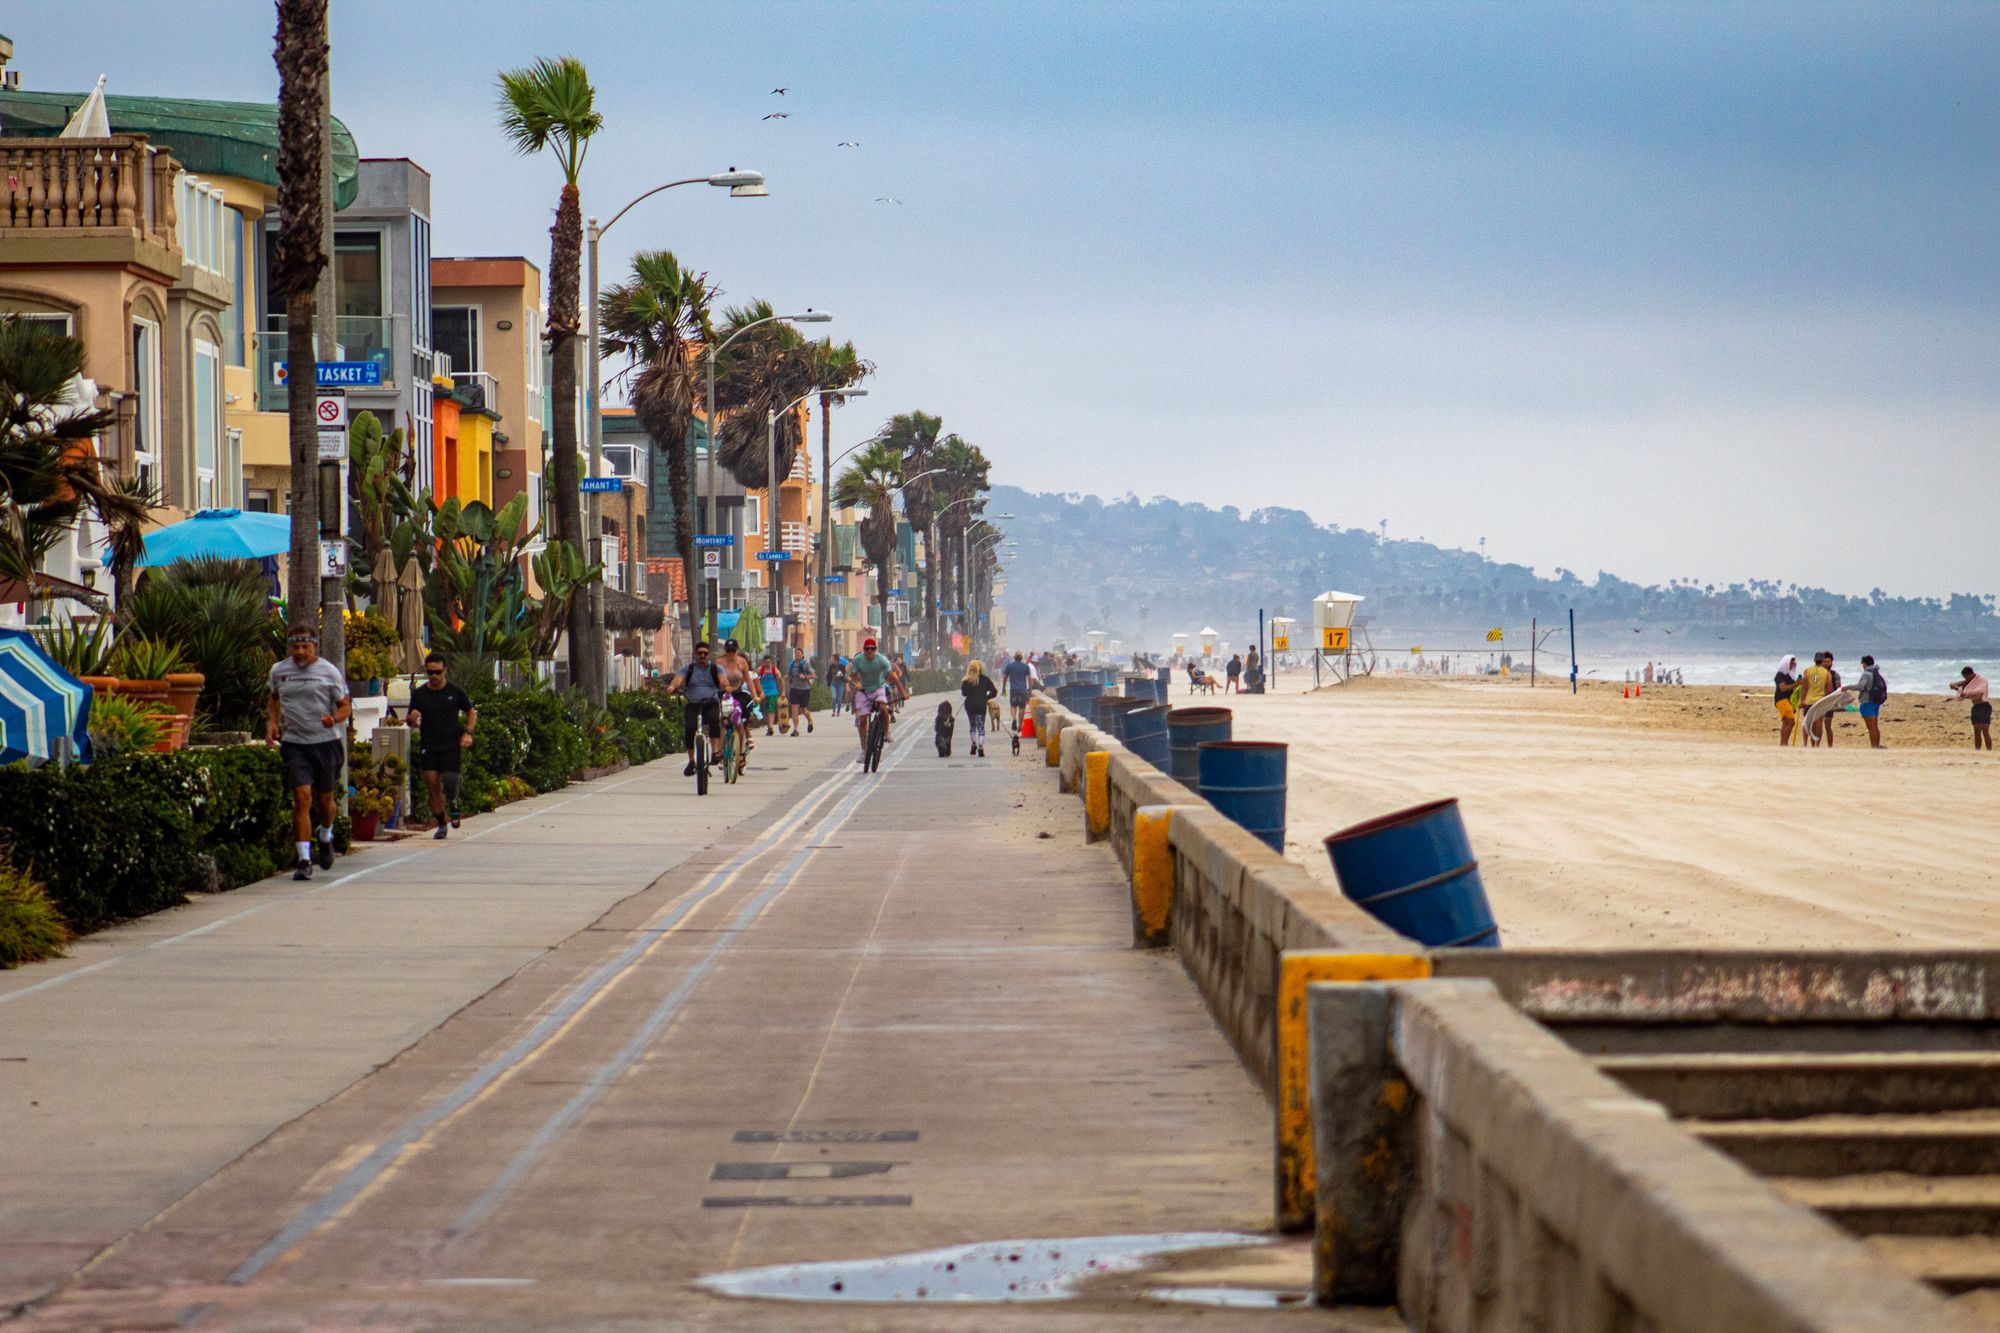 San Diego is a perfect destination for a wheelchair accessible vacation.